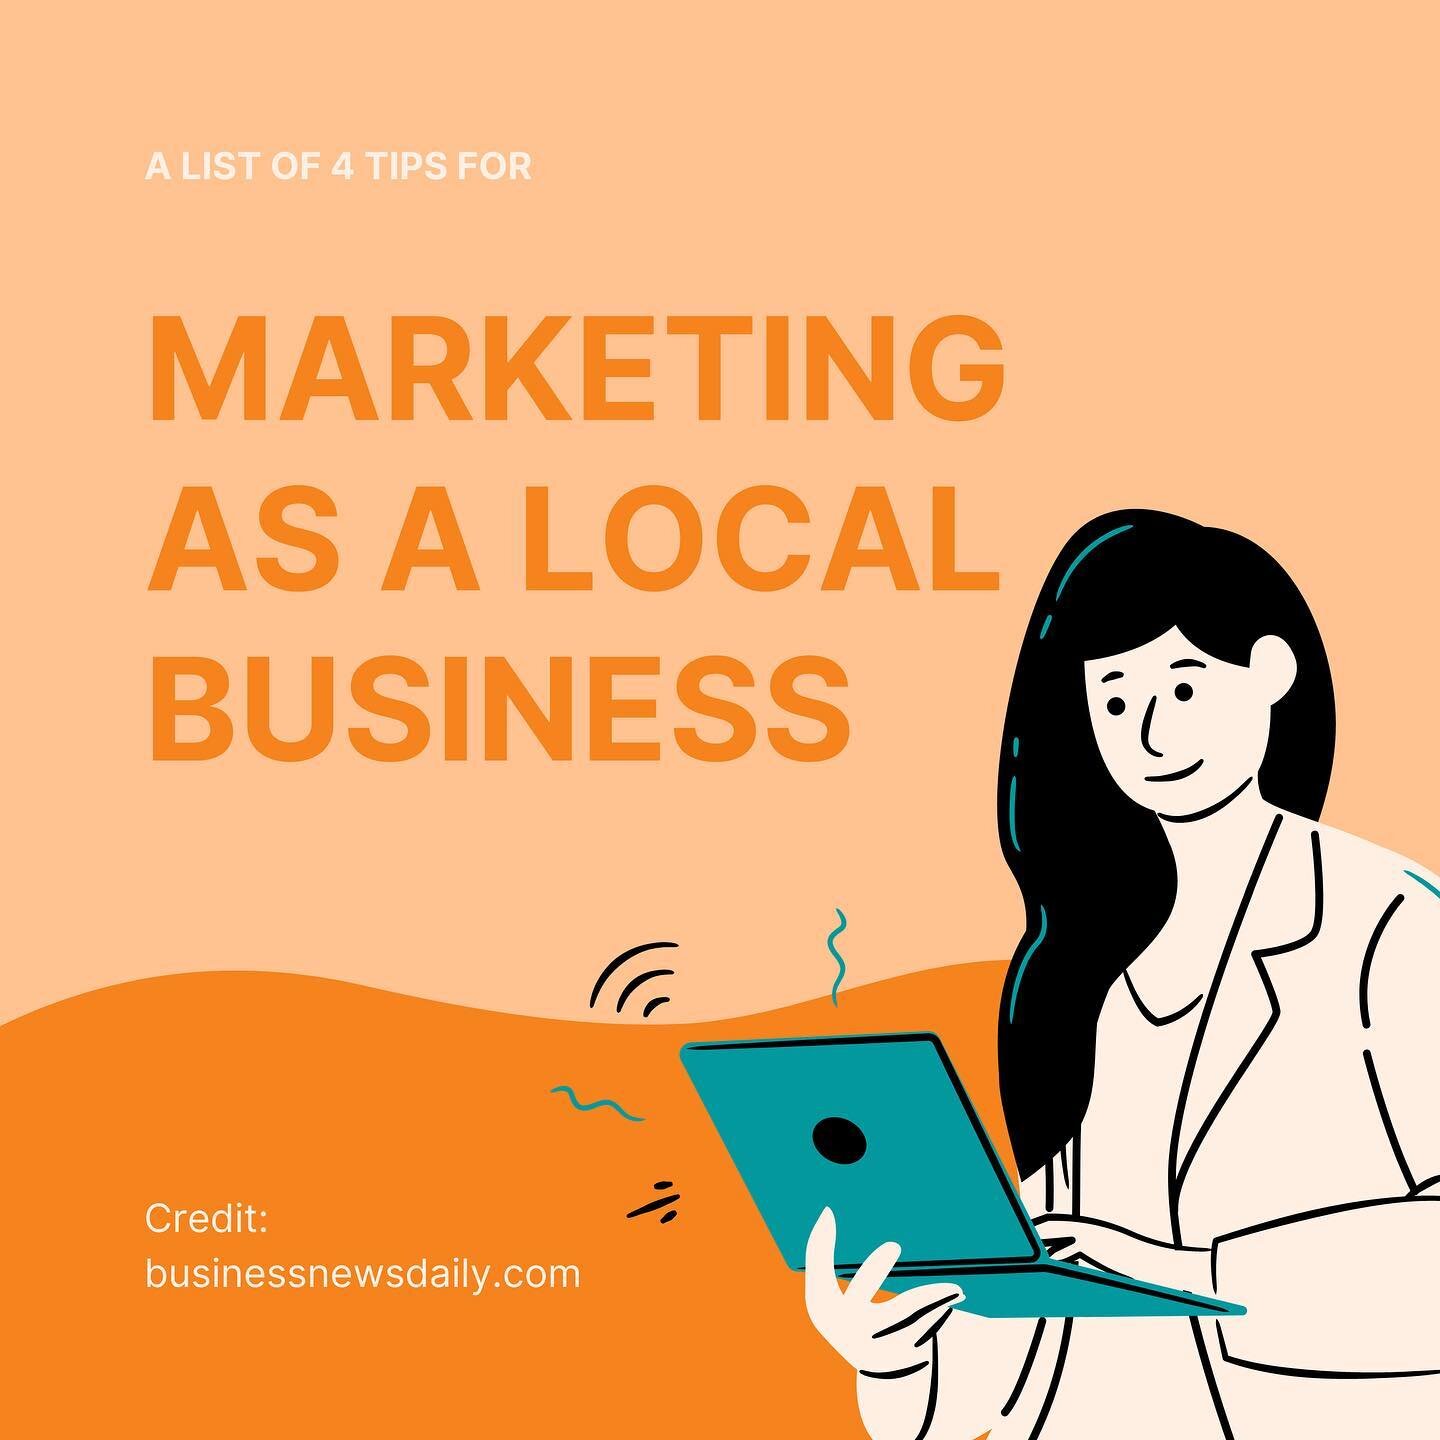 Local businesses don't always follow the same marketing plan as the big guys. Here are some strategies for your next marketing move.

Credit: https://www.businessnewsdaily.com/15770-local-marketing-strategies-for-small-business.html

#Brandsformation